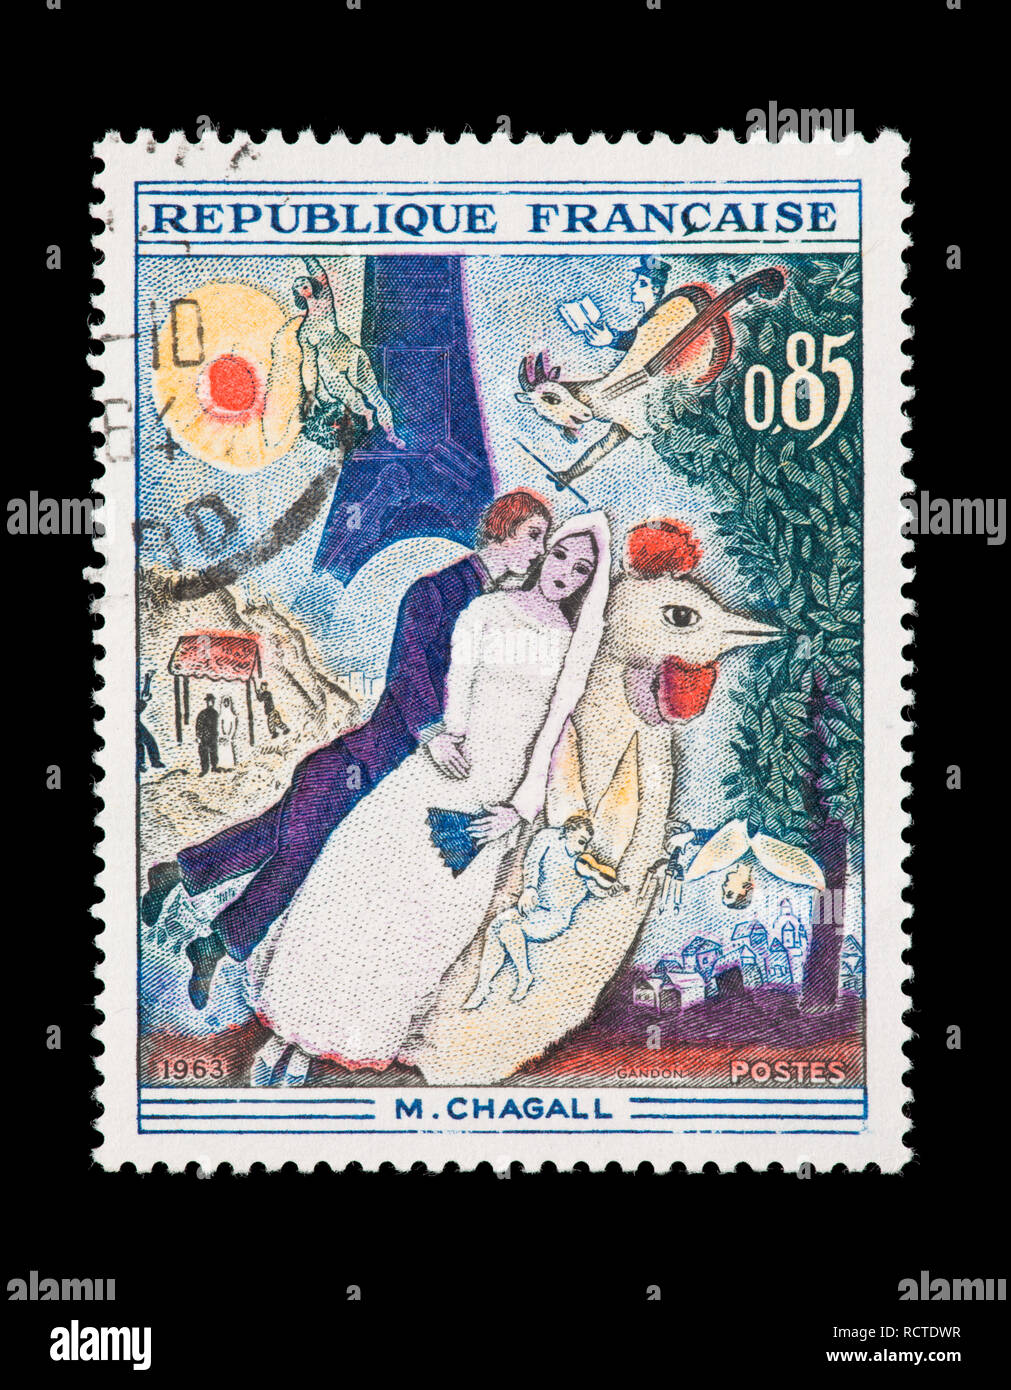 Postage stamp from France depicting the Marc Chagall The Married Couple of the Eiffel Tower Stock Photo